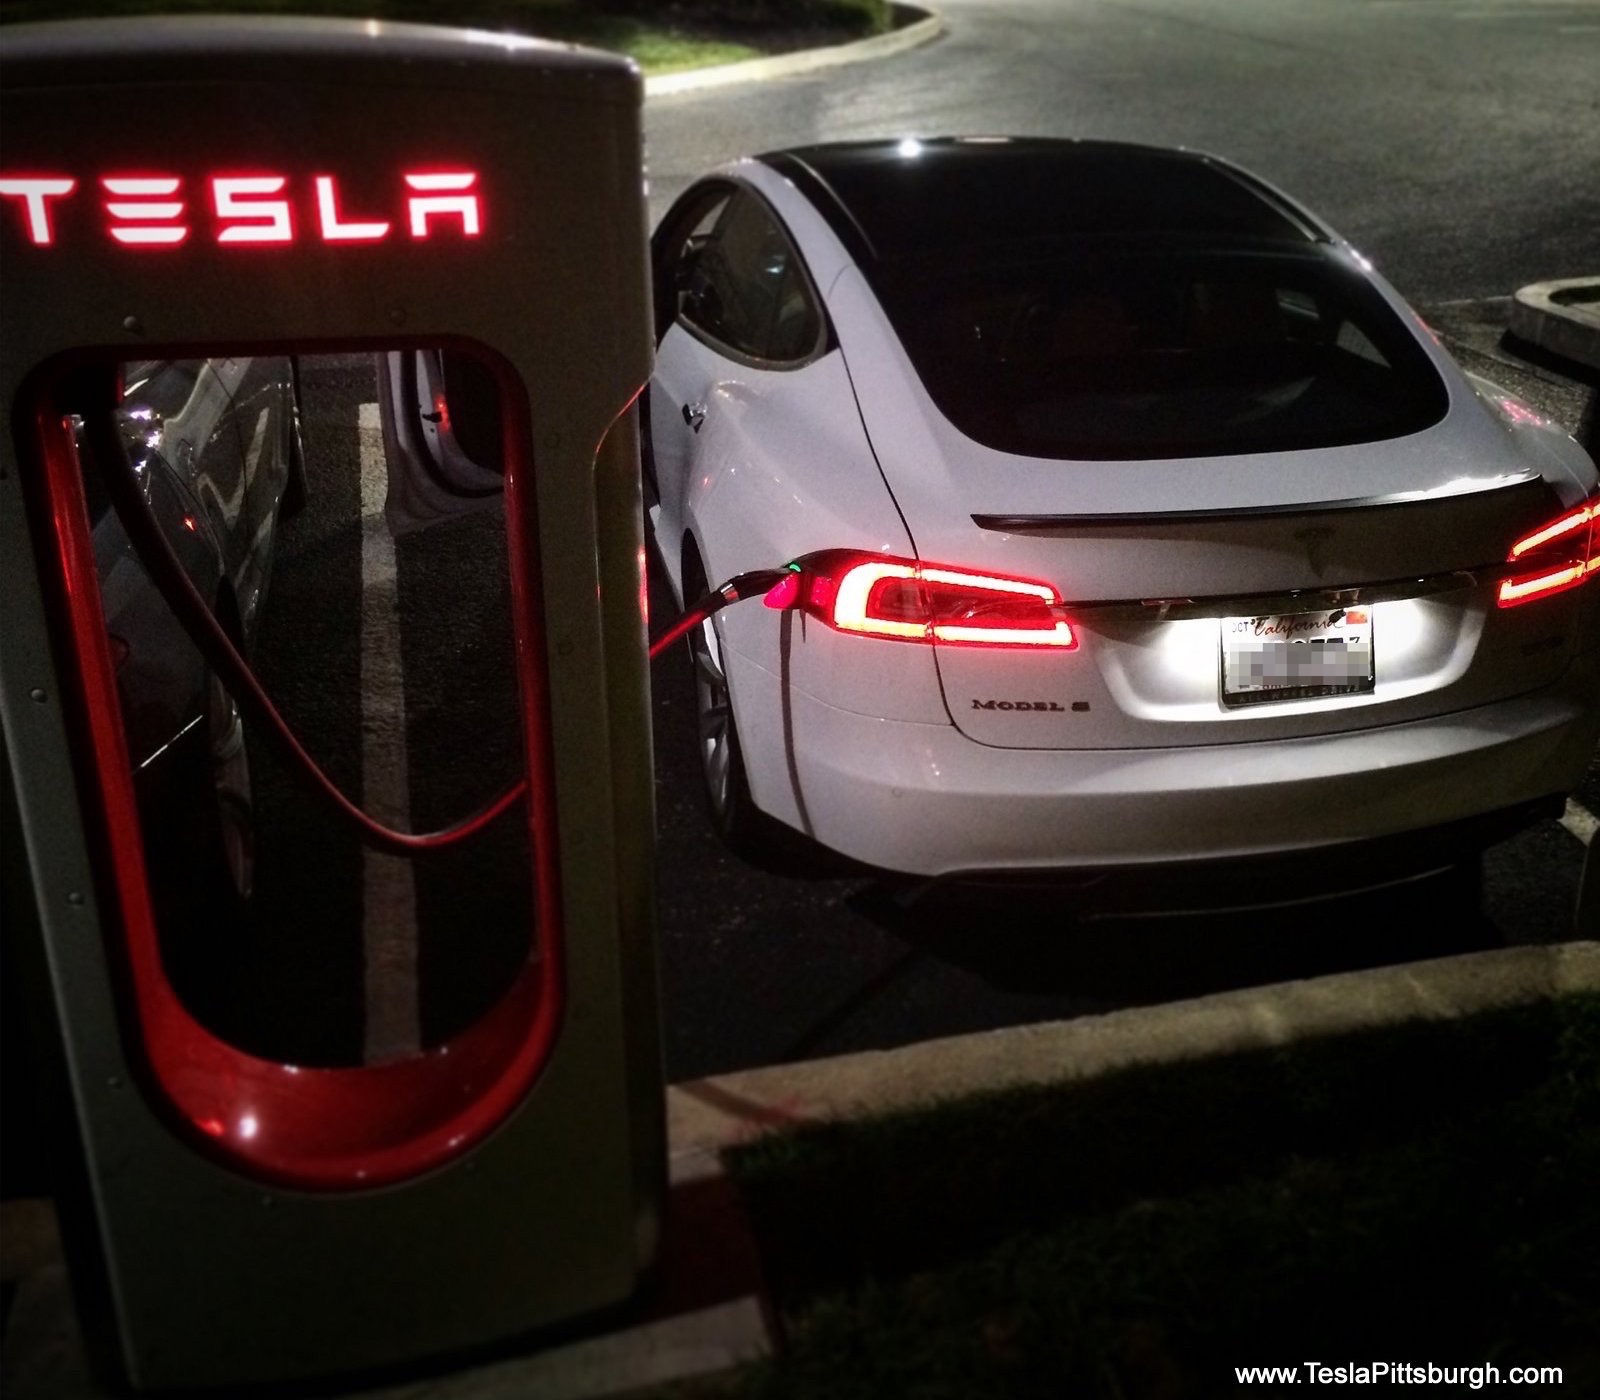 Tesla’s Supercharger Network recognized by Morgan Stanley as ‘competitive moat’